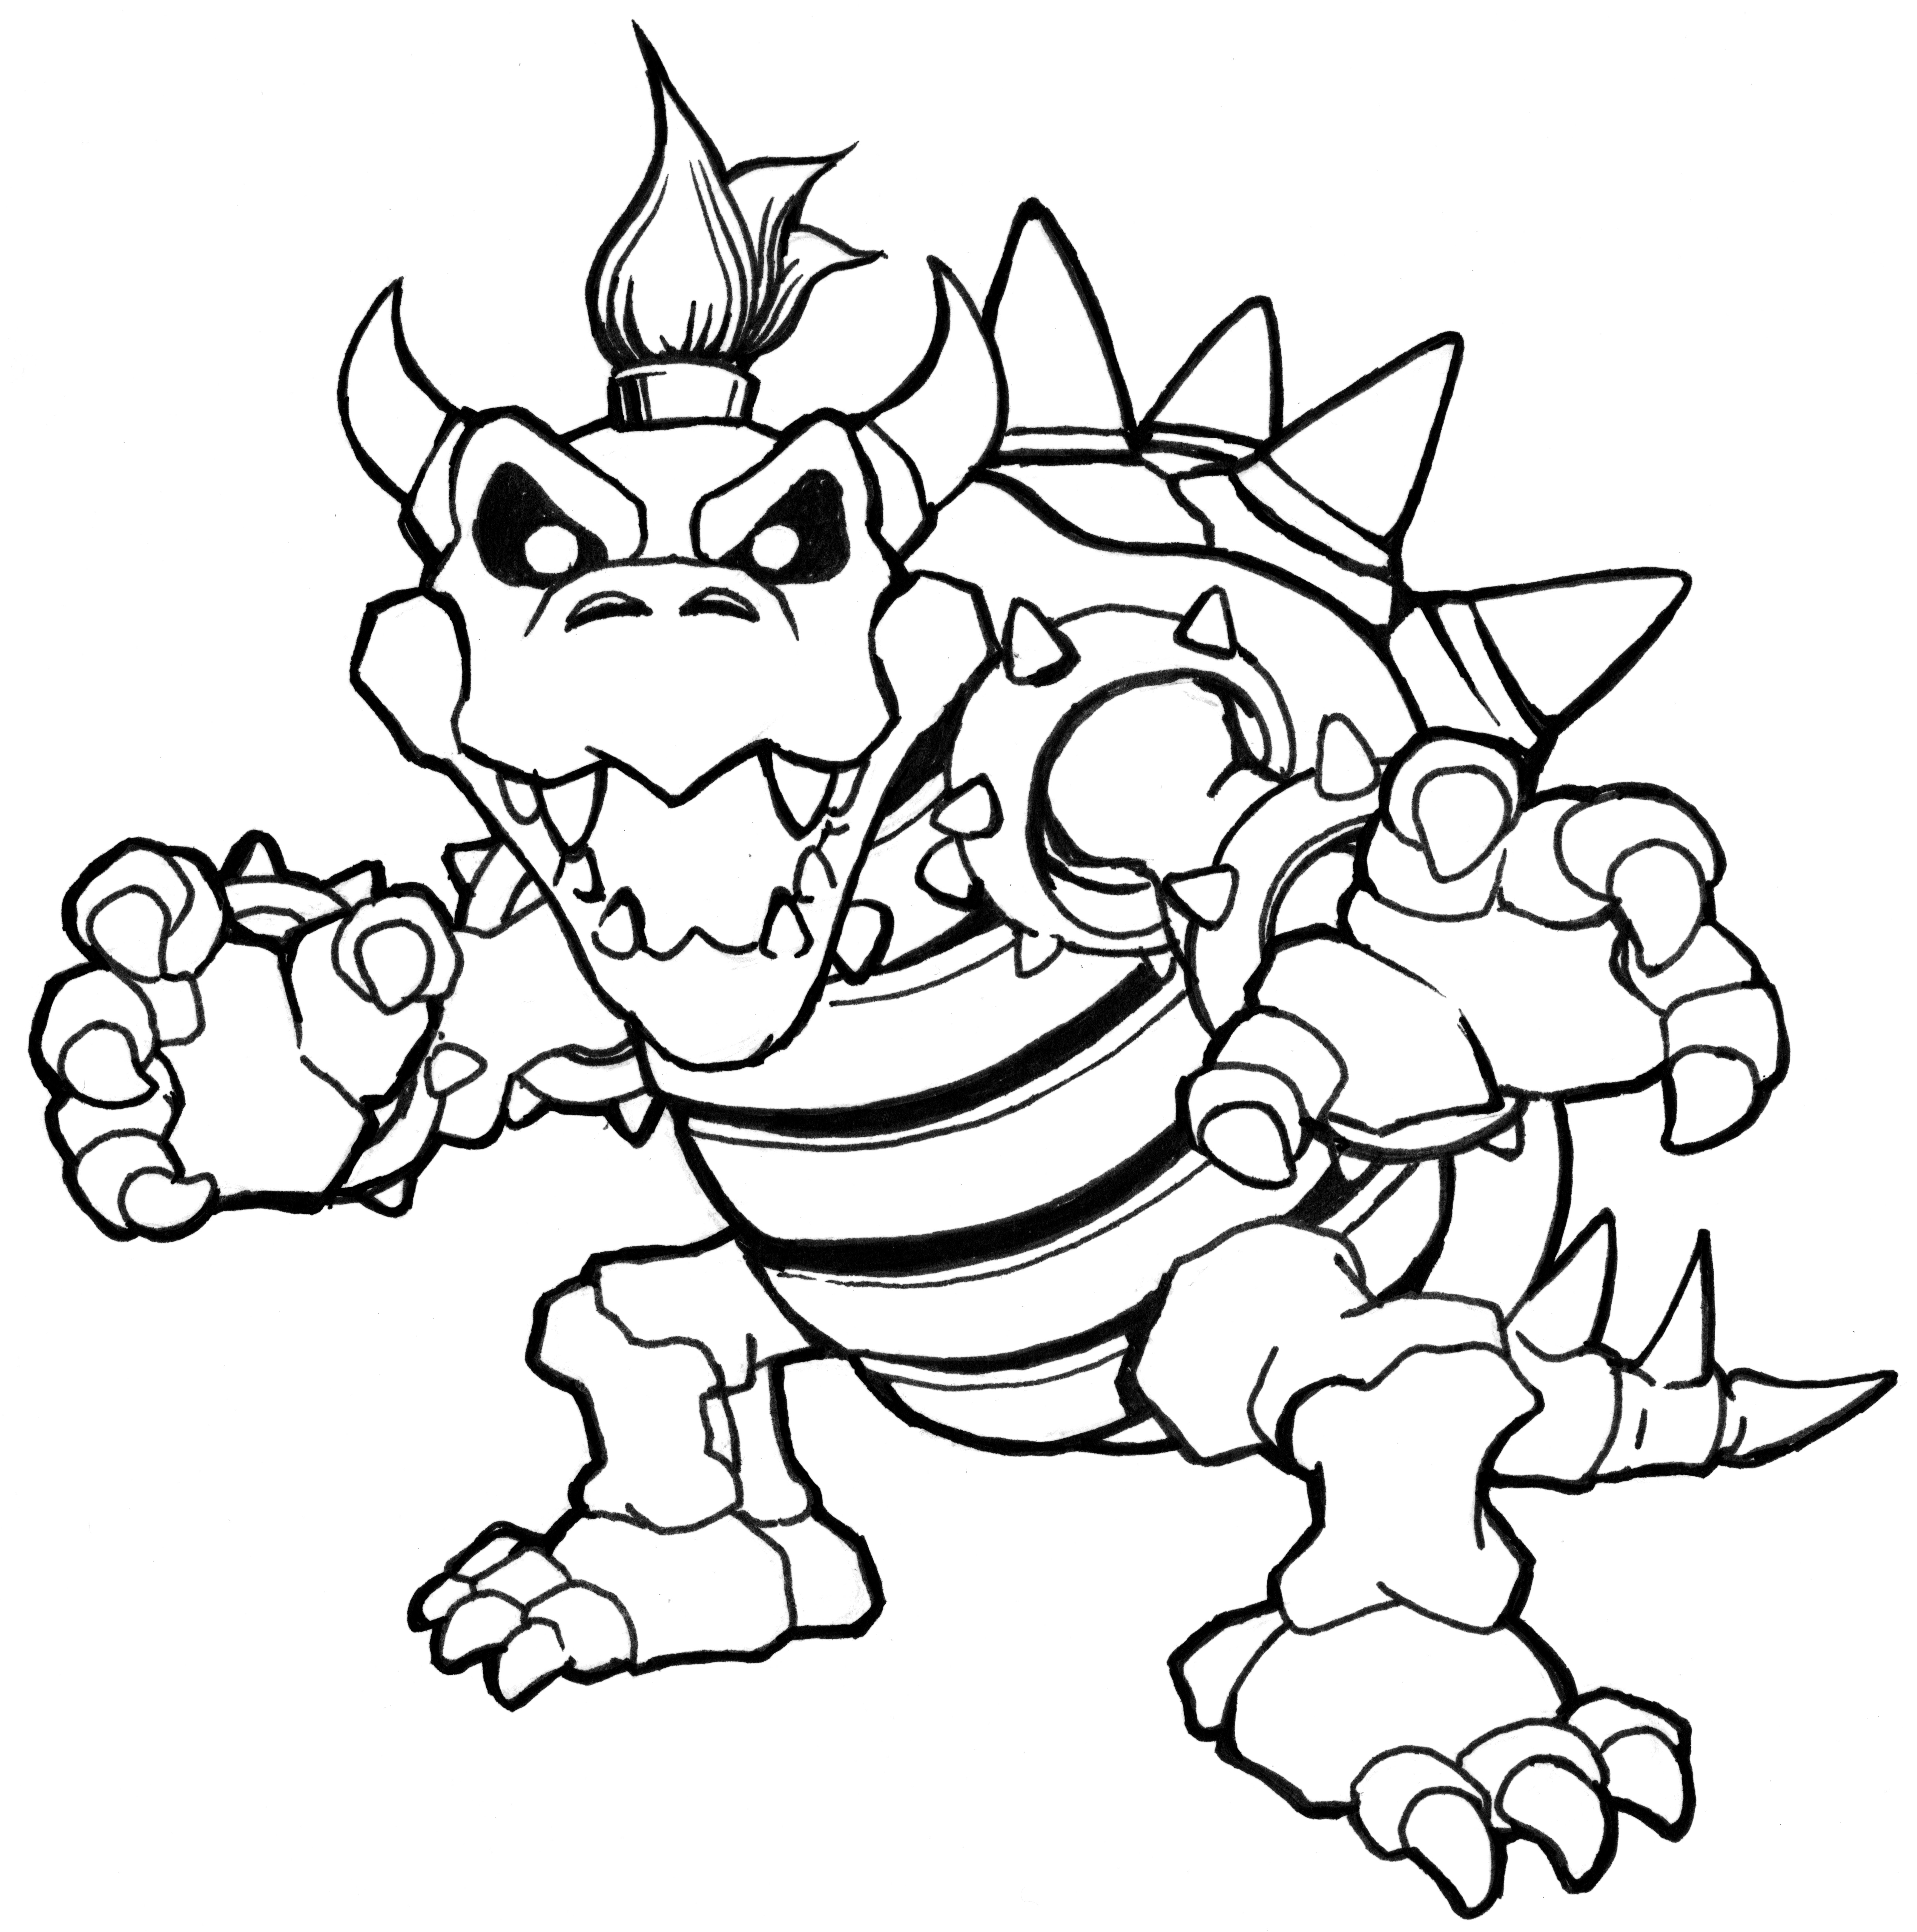 Bowser Jr Coloring Pages Free.